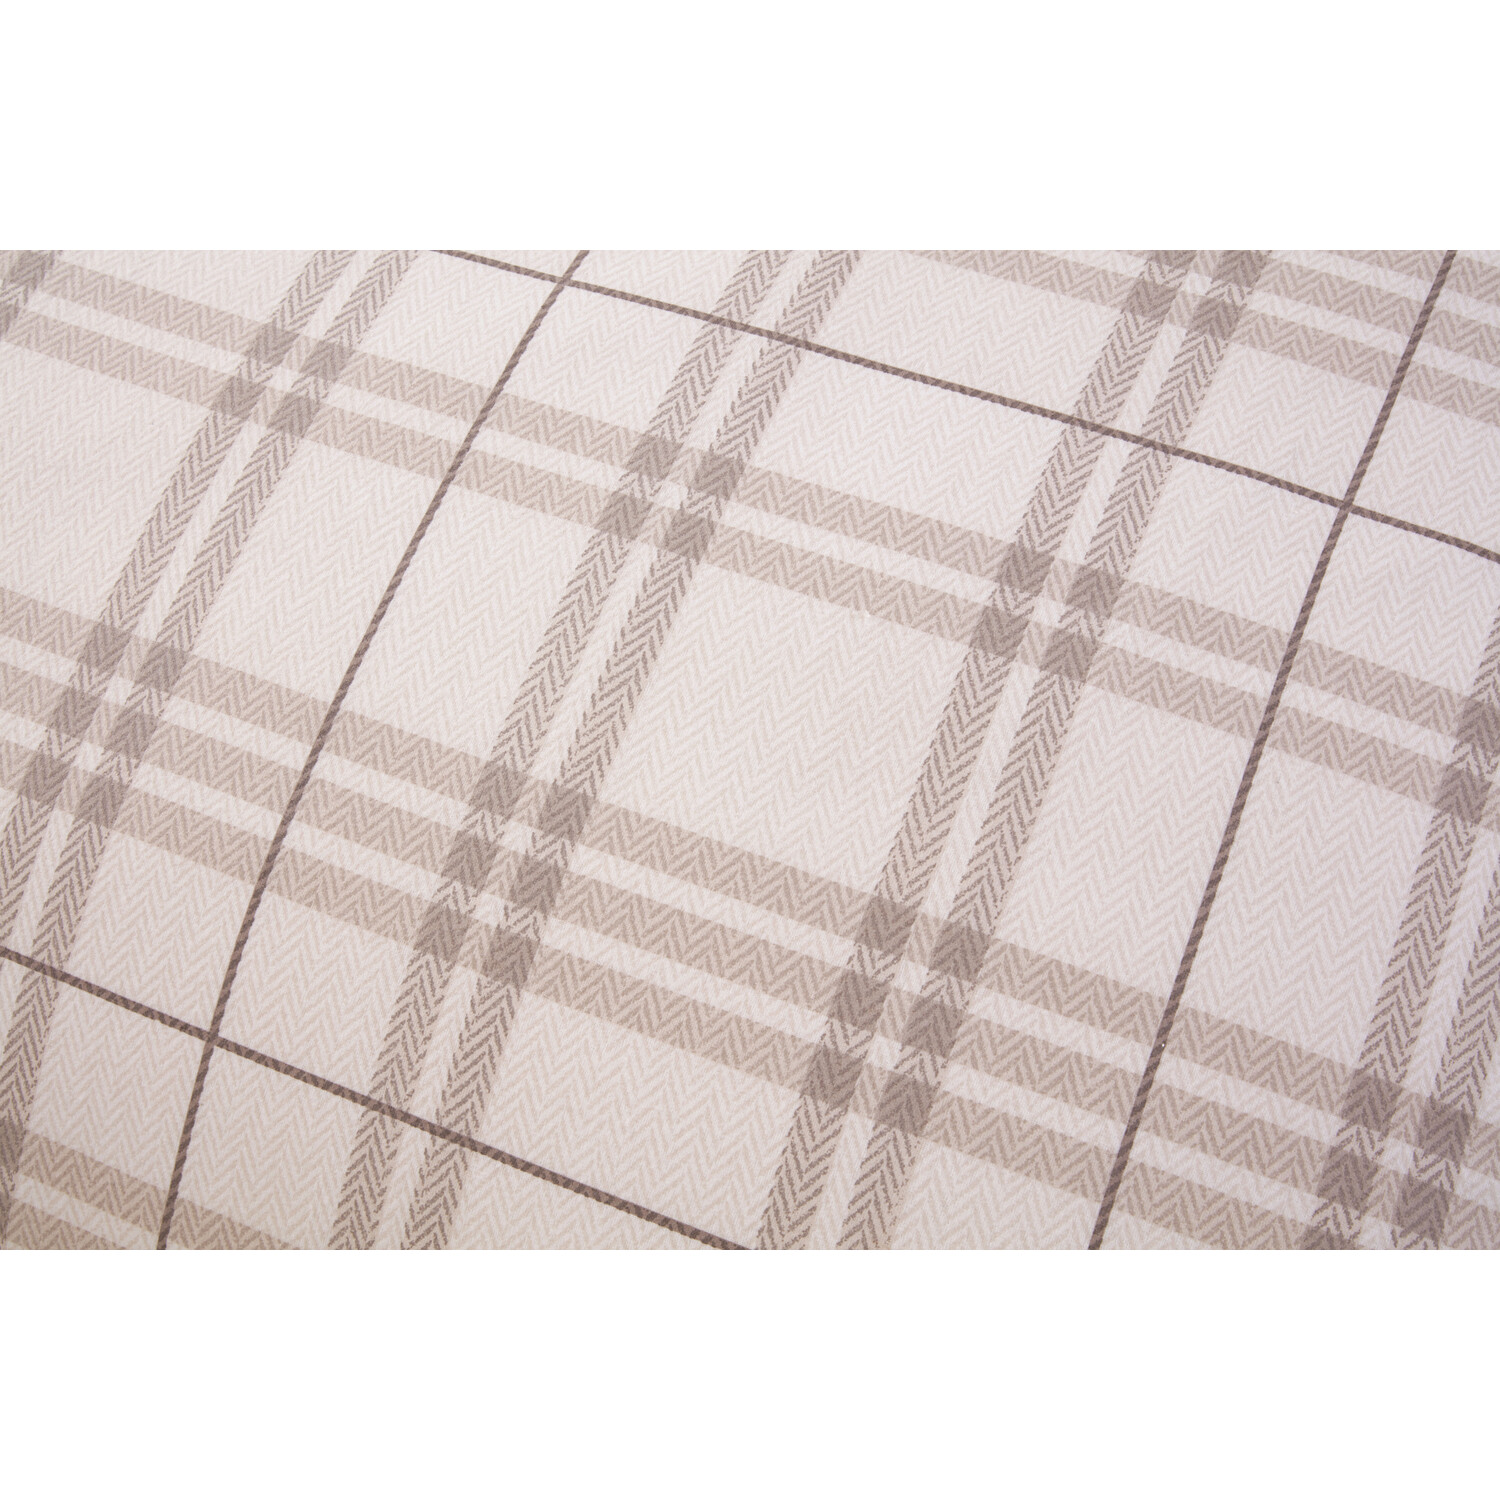 Fall Autumn Single Brown Check Duvet Cover and Pillowcase Set Image 6